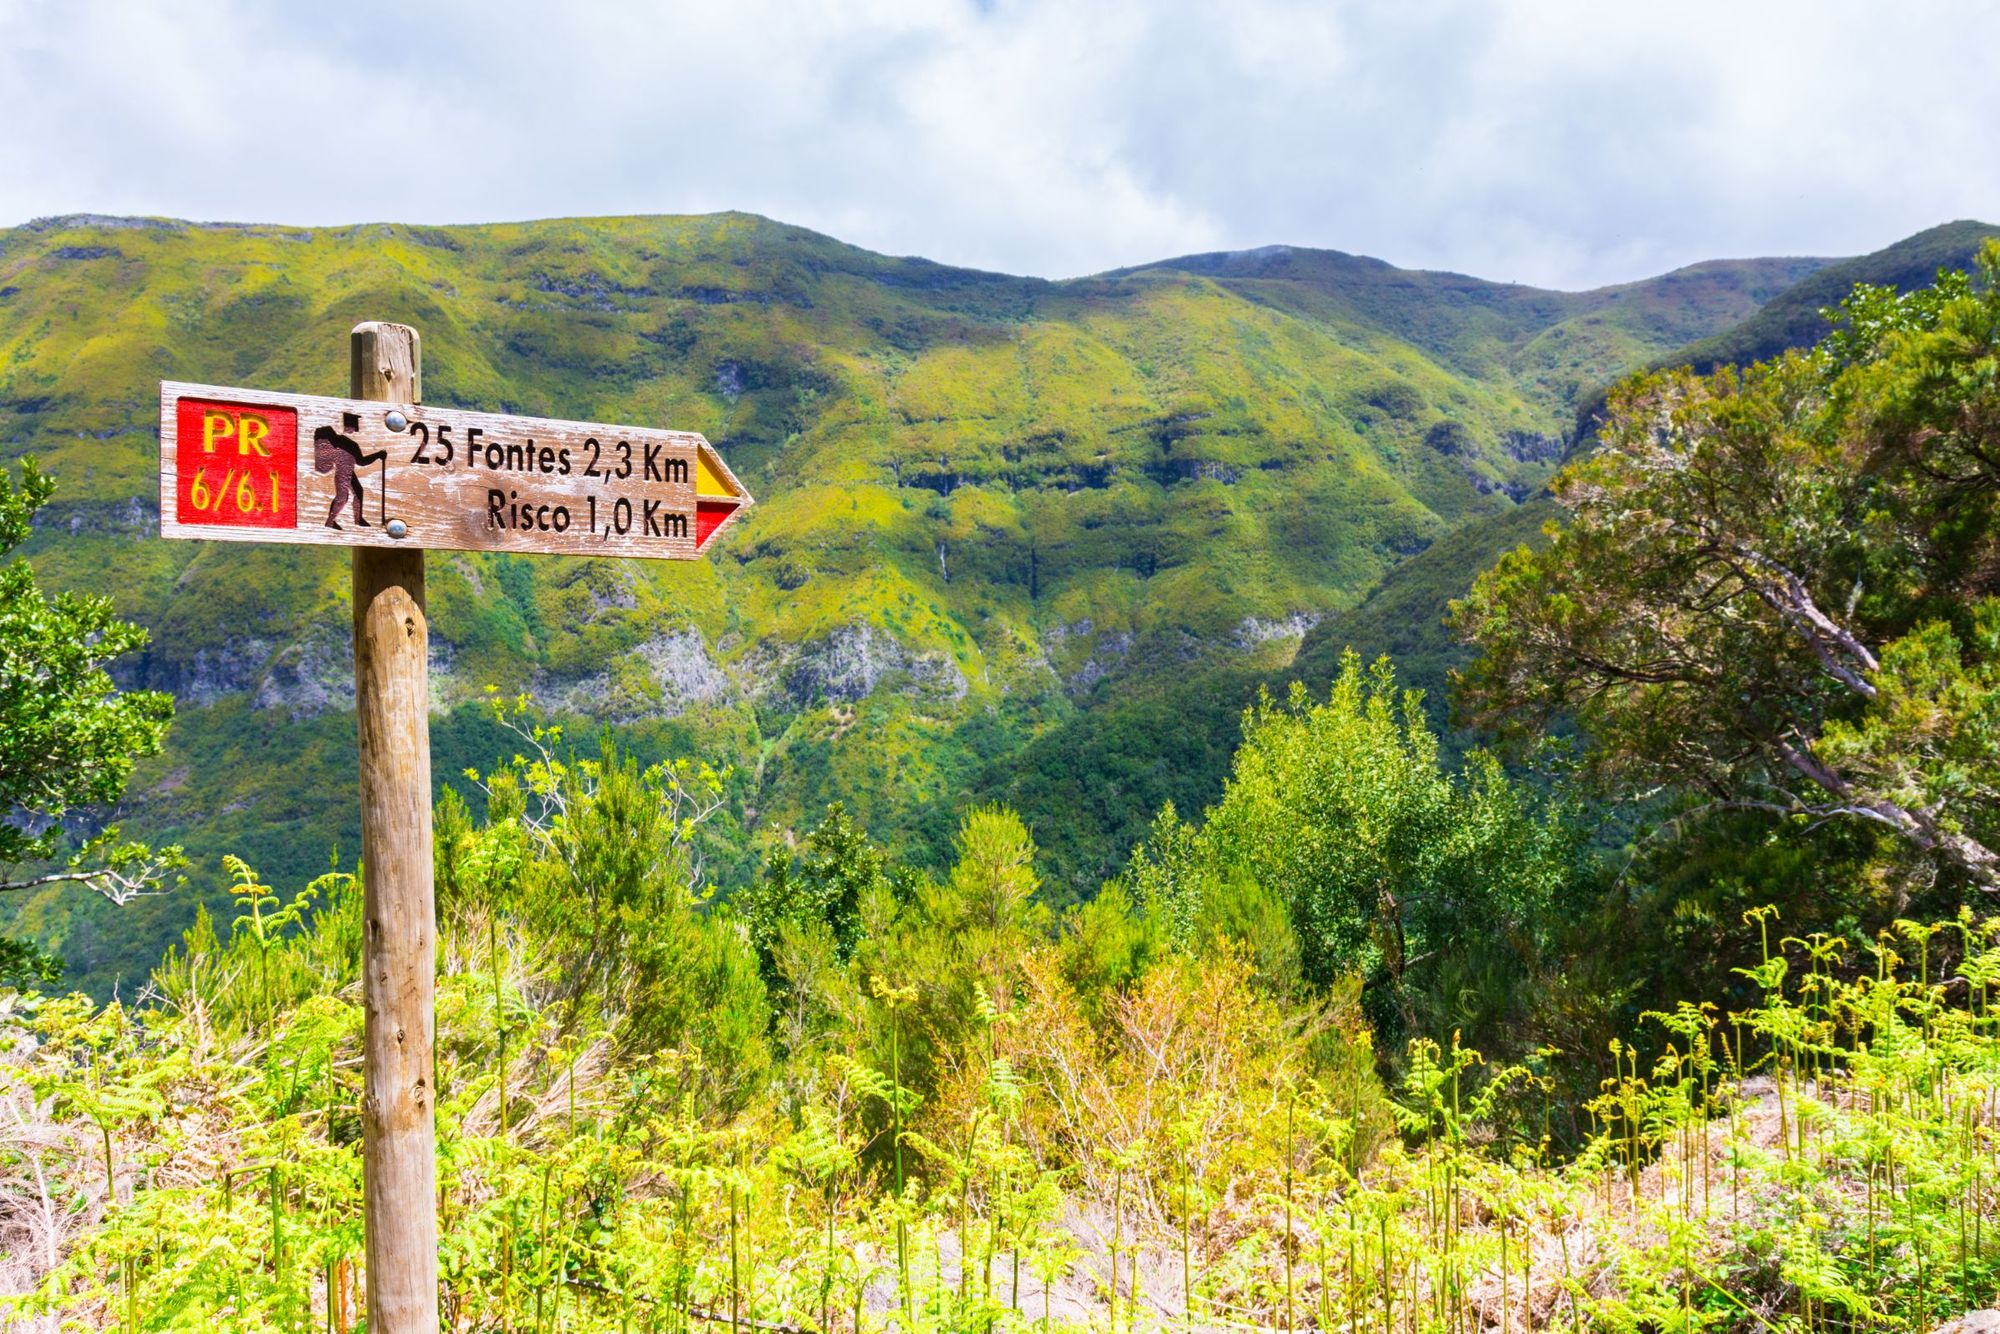 A signpost points down to the 25 Fontes, one of the best levada walks in Madeira, Portugal. Photo: Getty